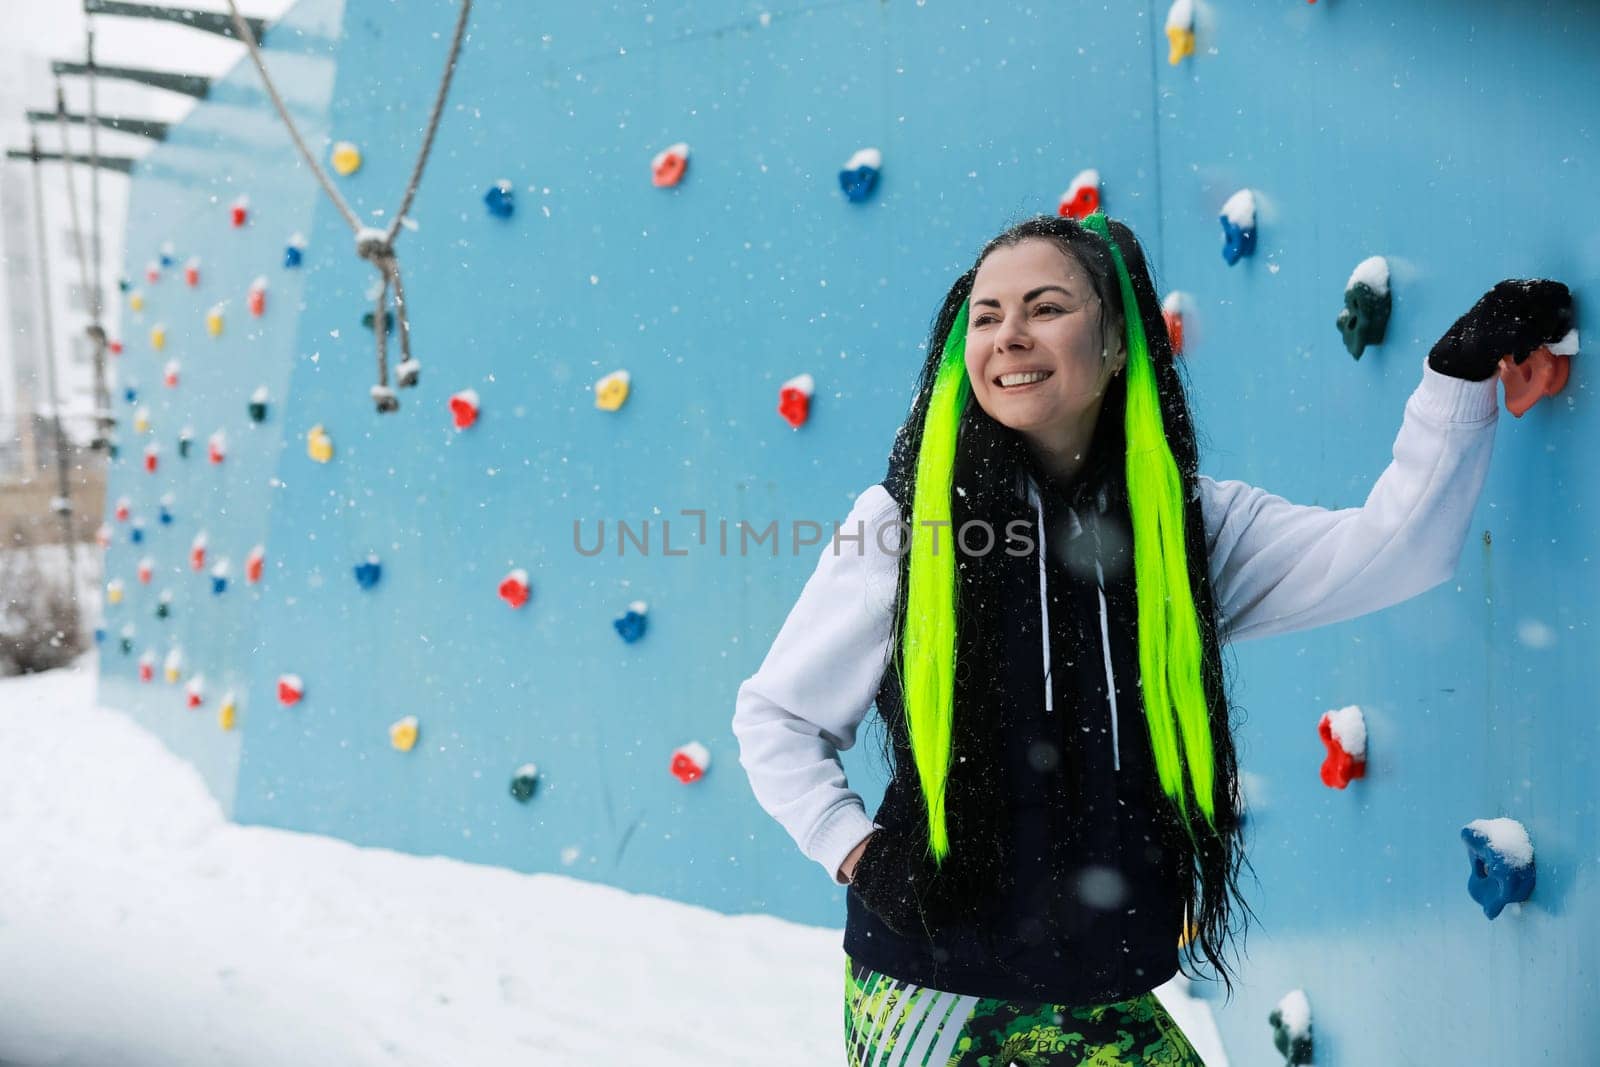 A woman with vivid green hair stands confidently in front of a challenging climbing wall, prepared to tackle the ascent. The colorful hair adds a striking contrast to the rugged terrain behind her.